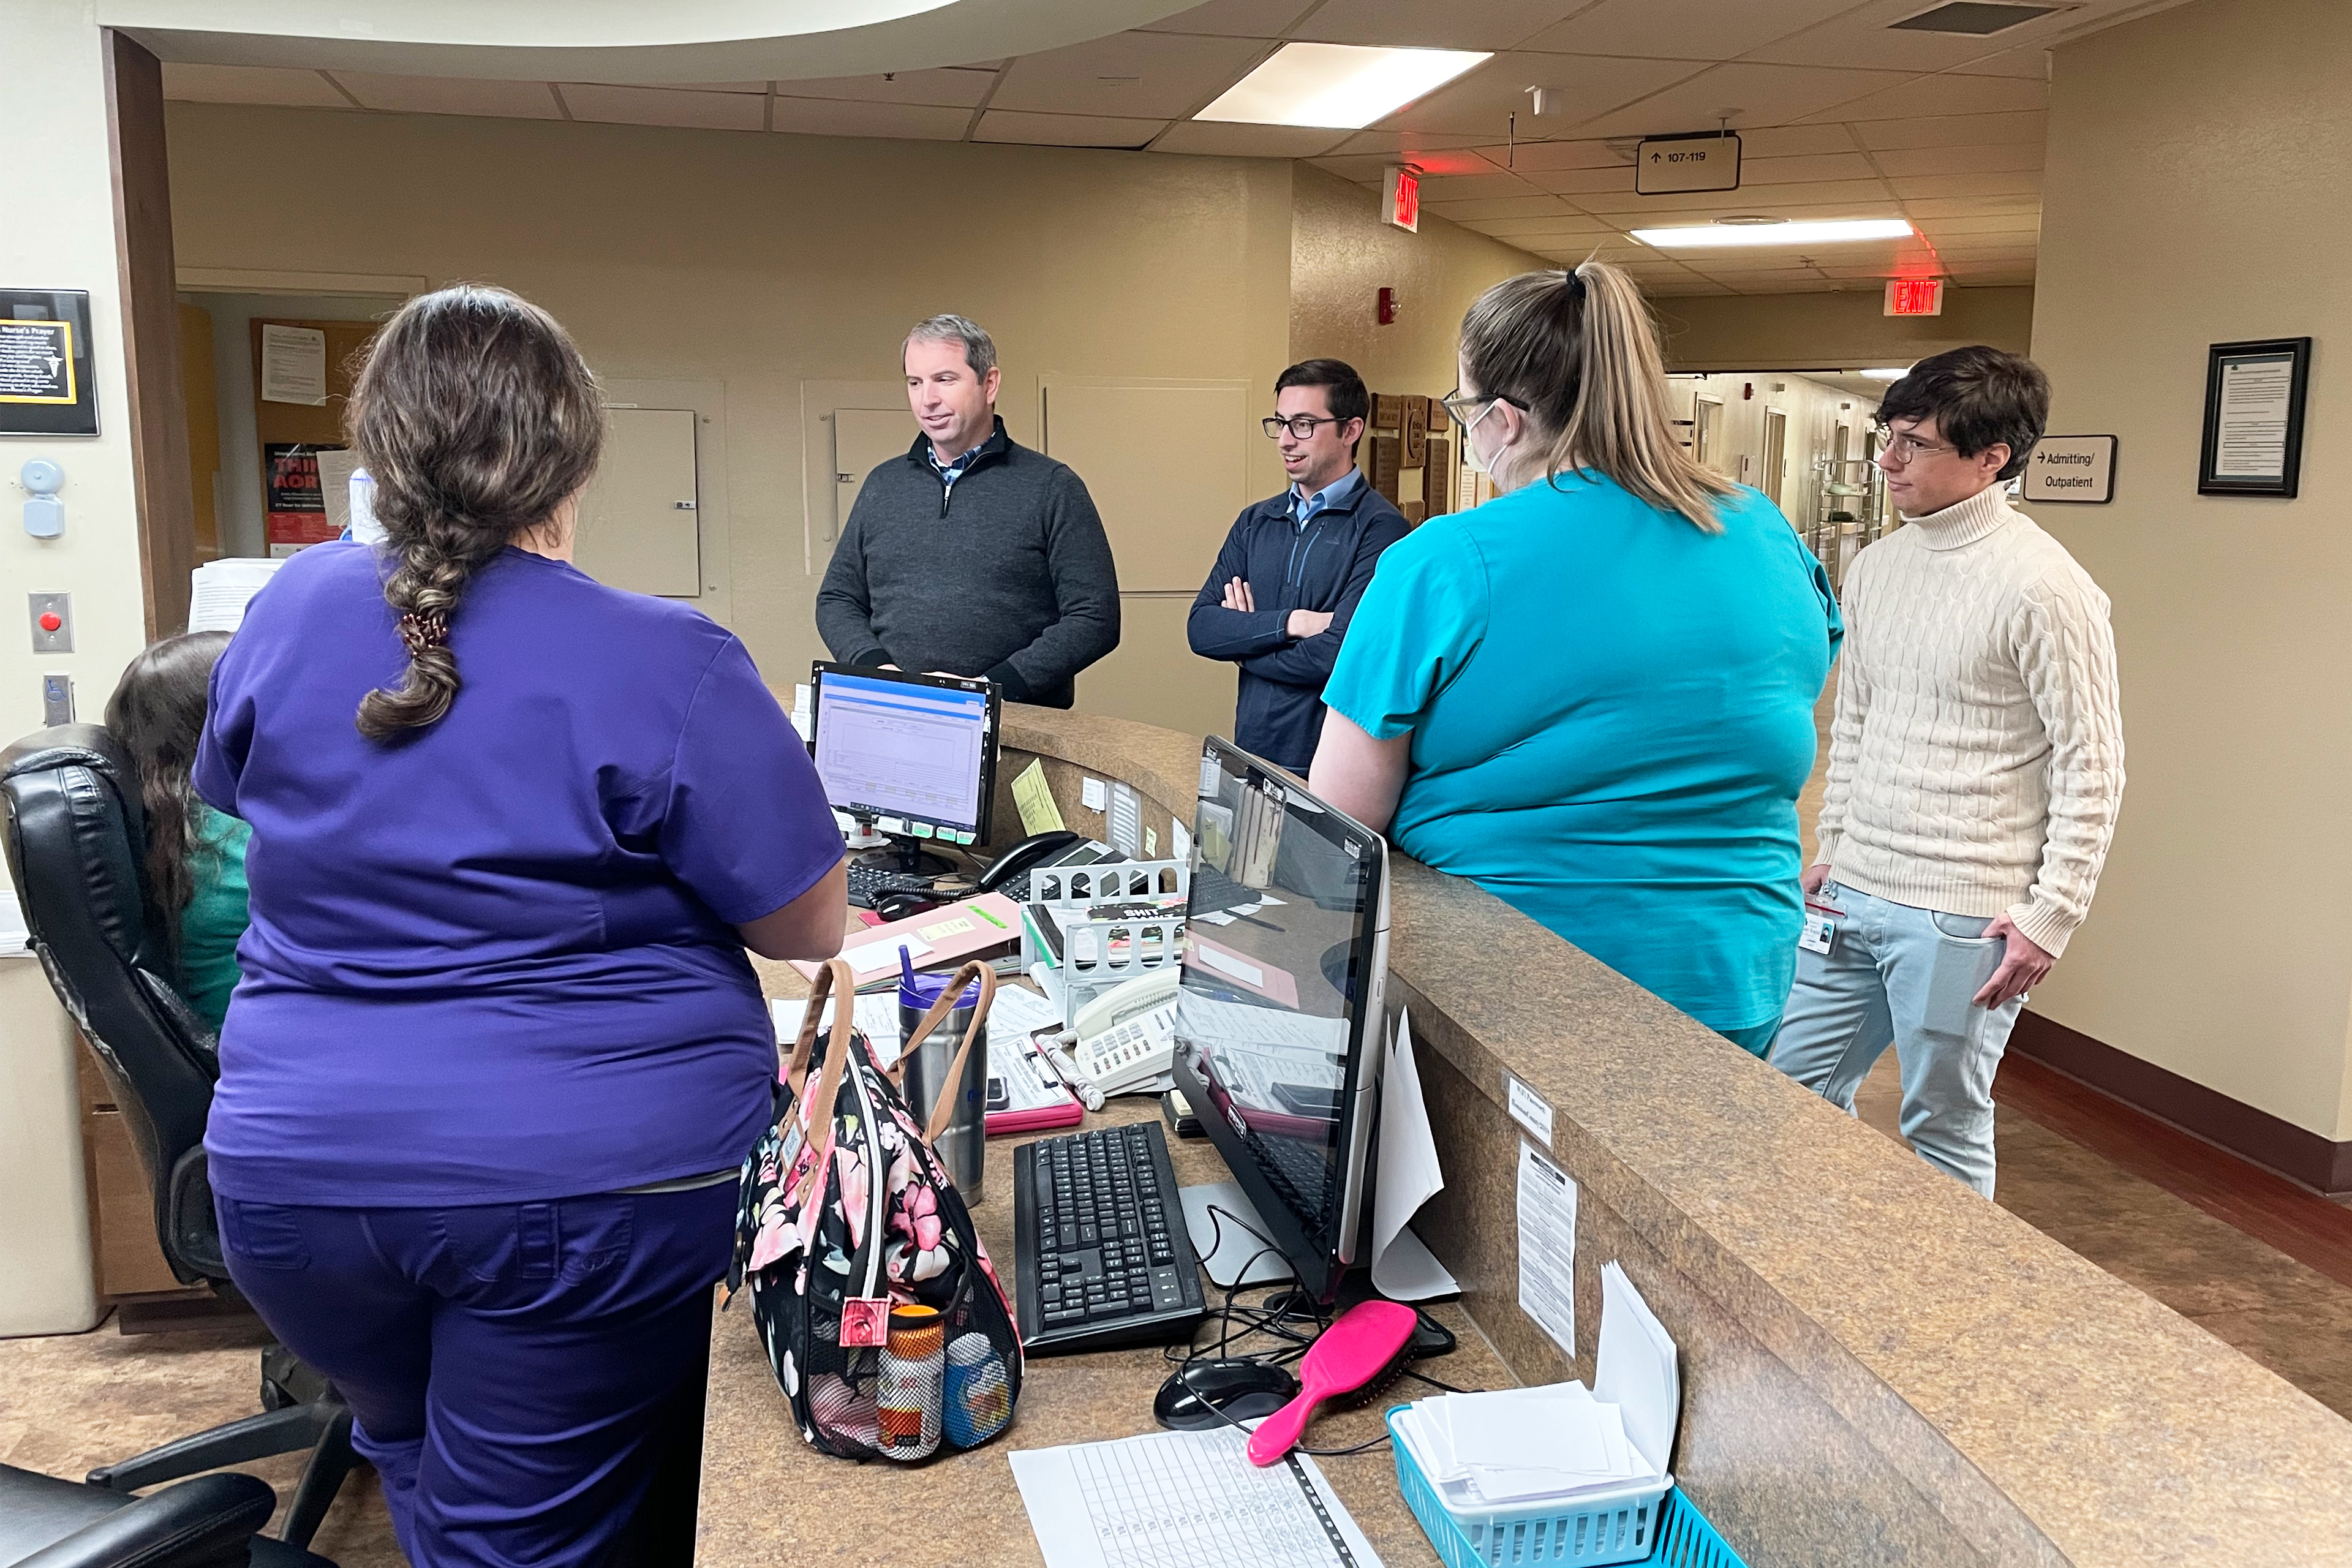 A photo shows staff gathered around the front desk of a hospital waiting room.